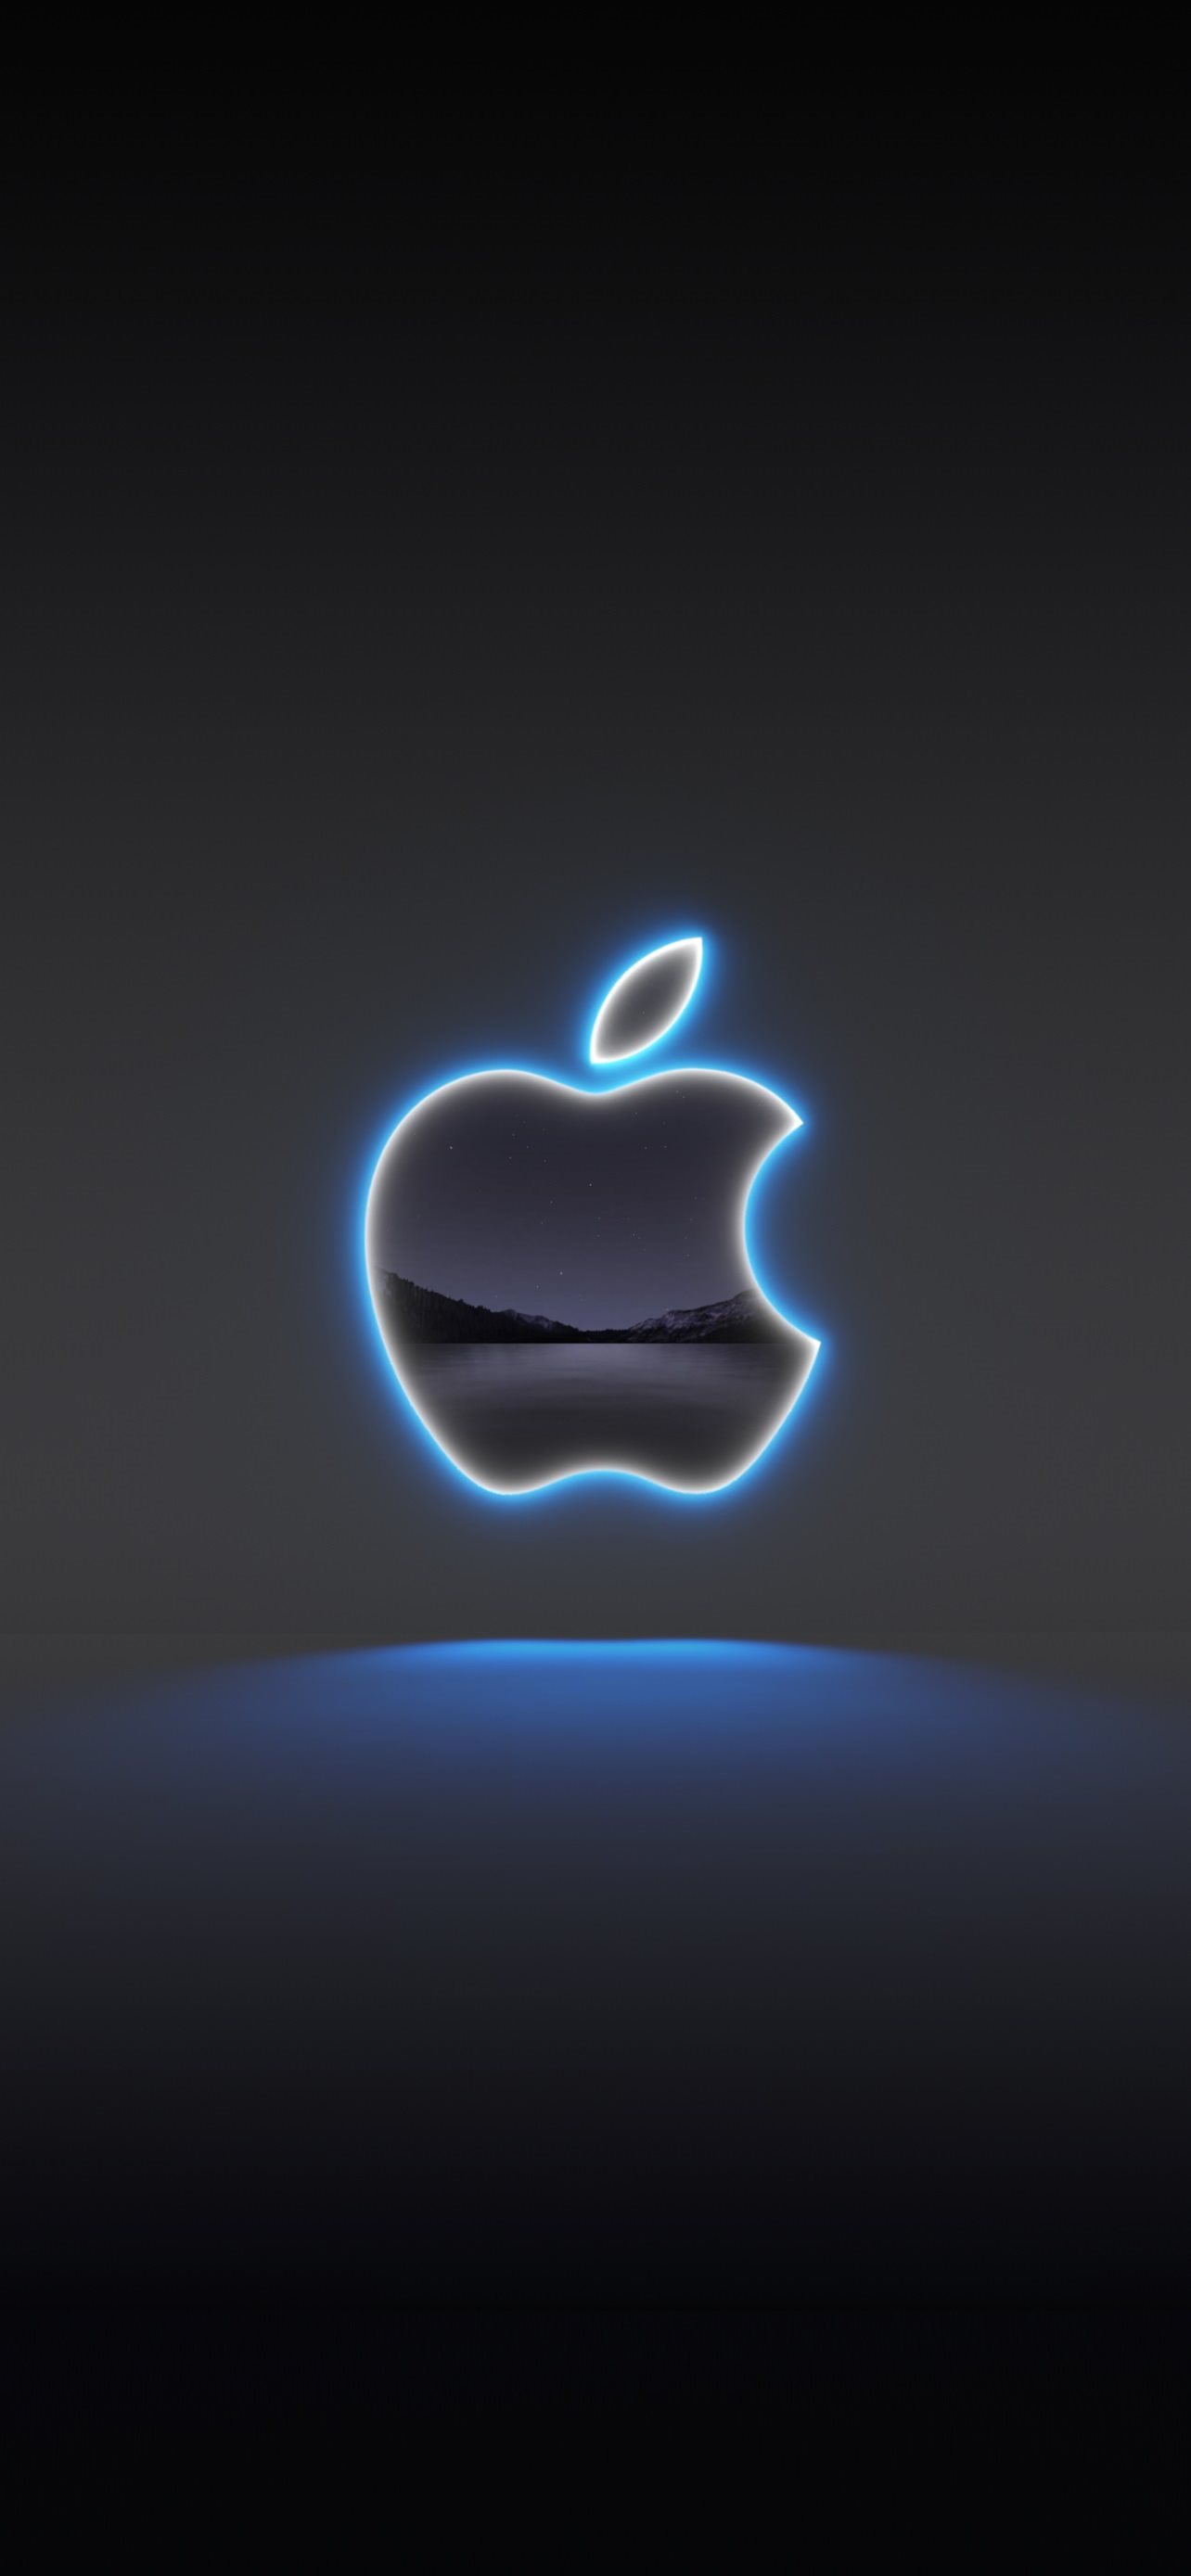 California Streaming Apple Event 2 iPhone wallpaper 